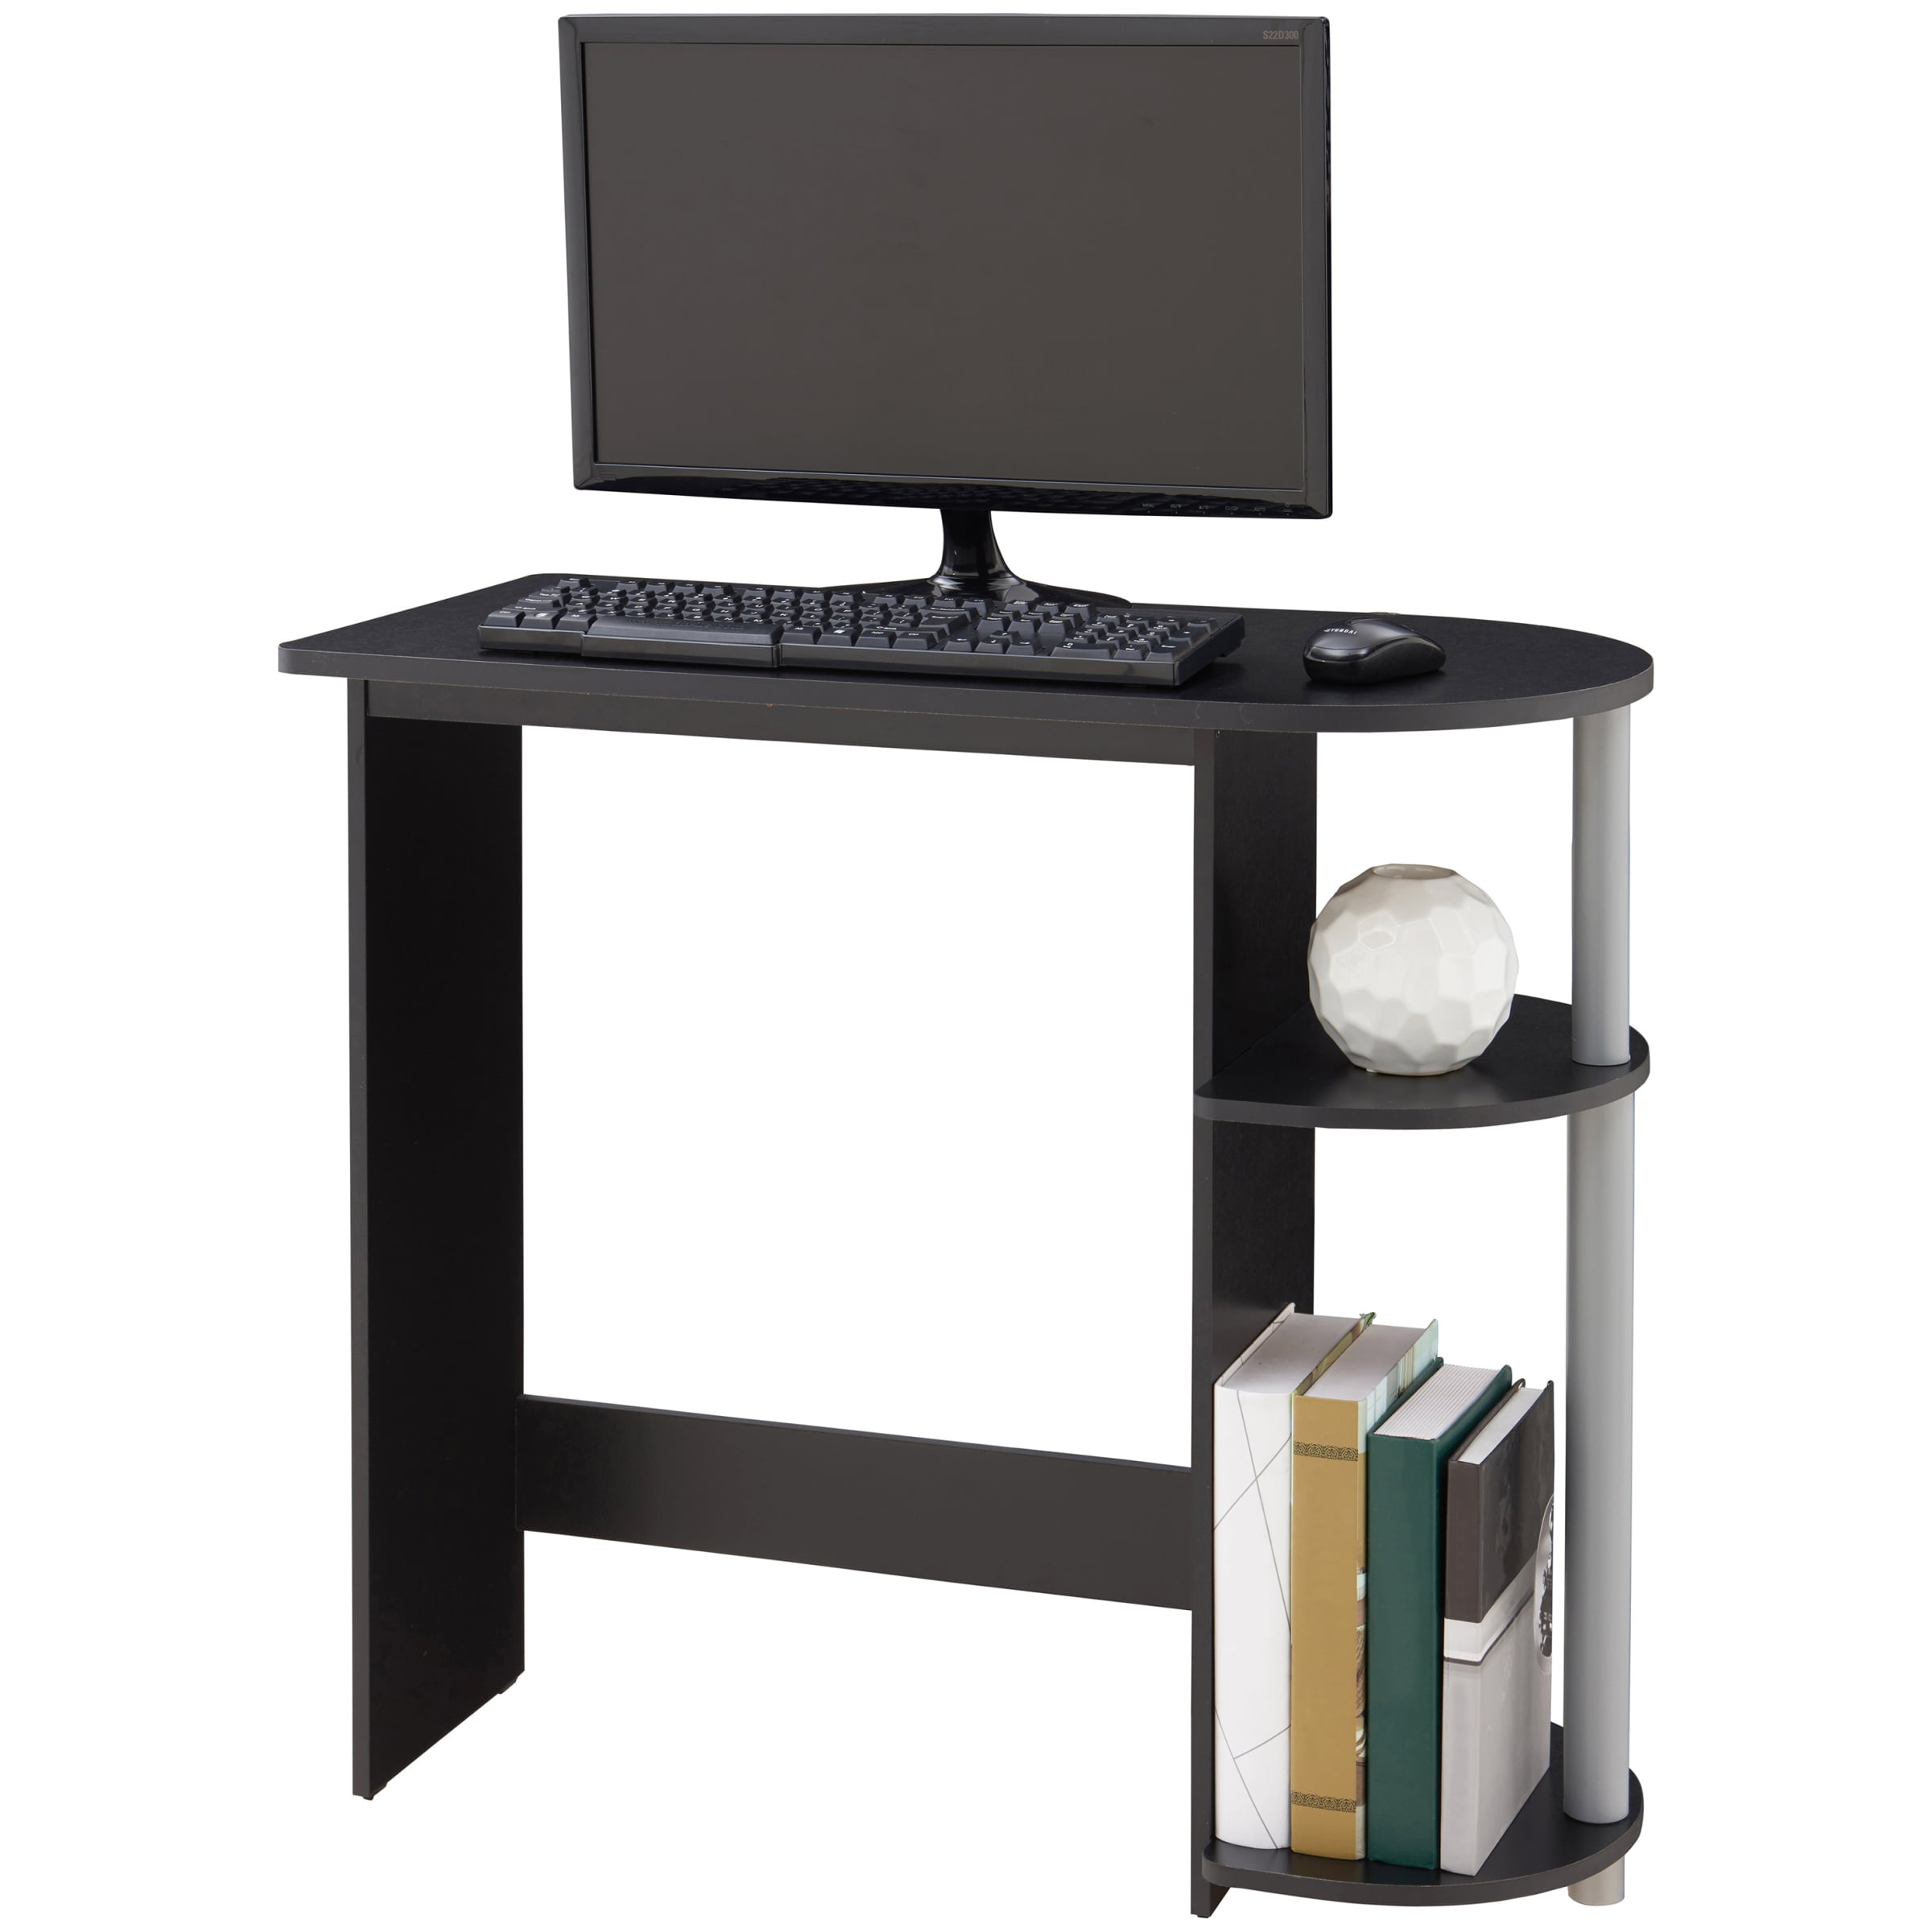 Mainstays Computer Desk with Built-in Shelves, Multiple Colors - 3